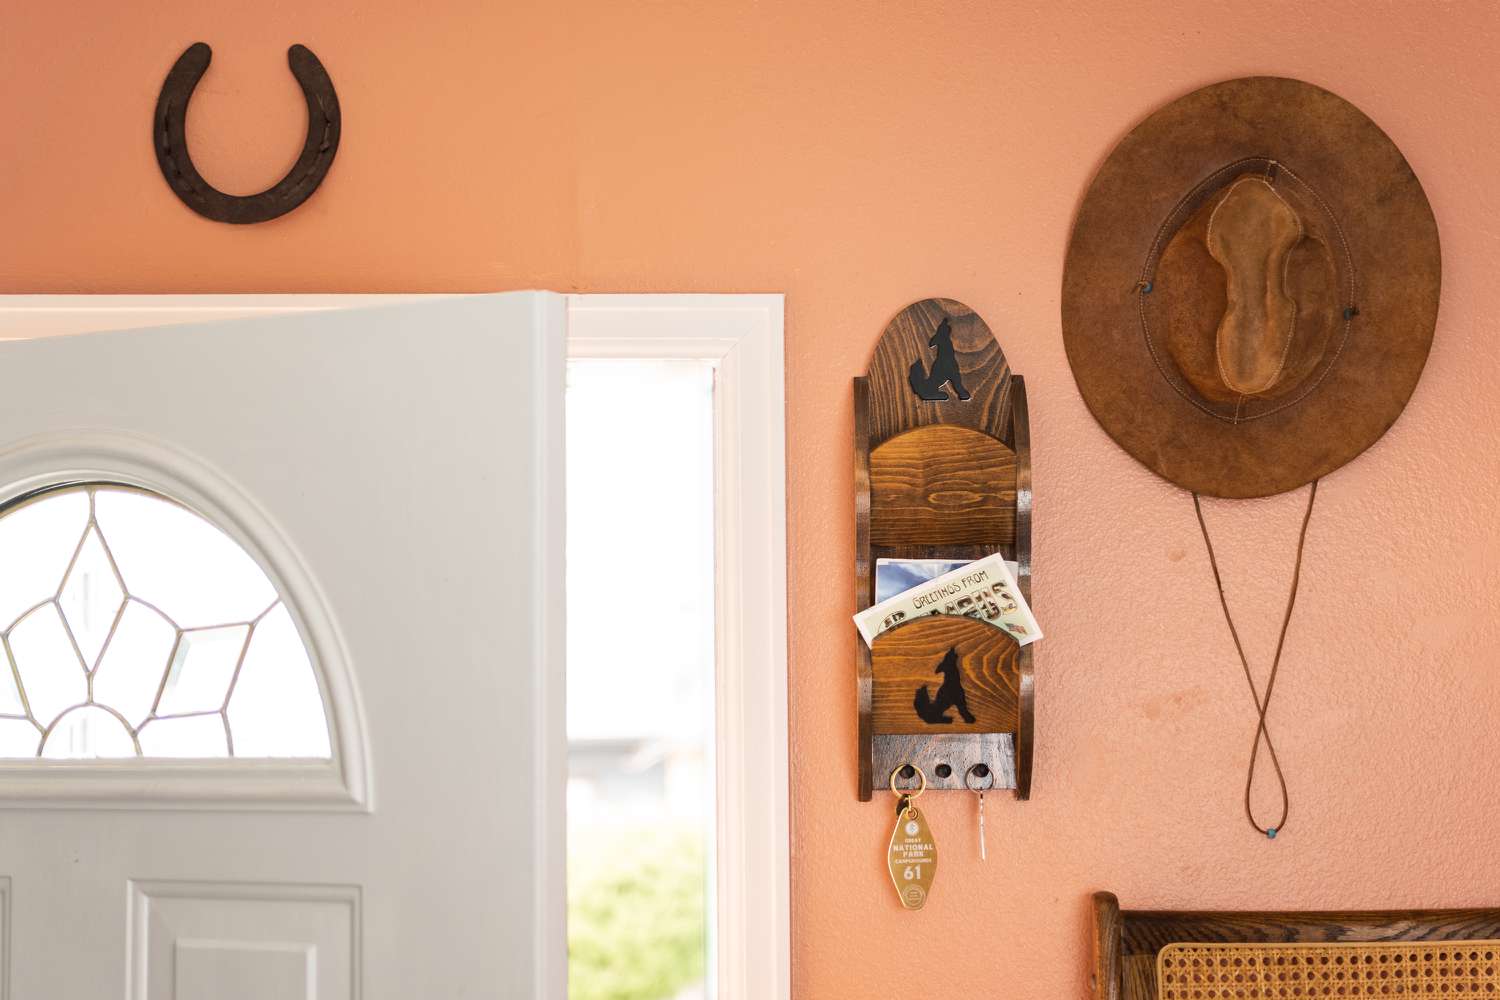 Dark horseshoe hanging over white door next to cowboy hat and letter holder closeup